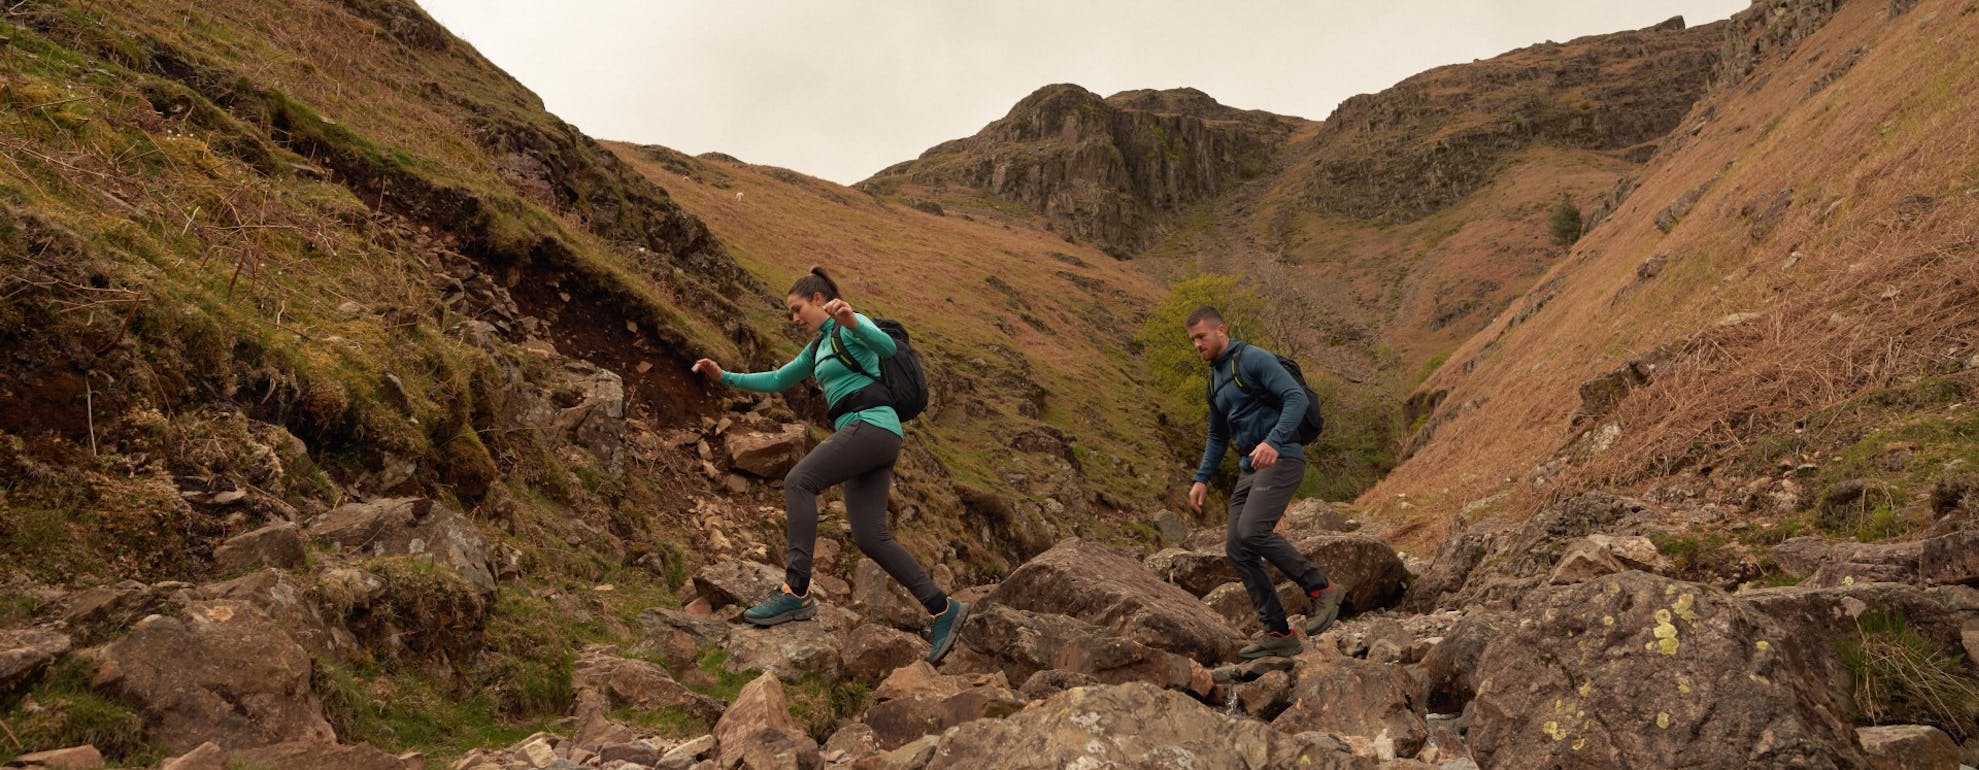 inov-8 'Venture lighter, faster' Hiking Collection